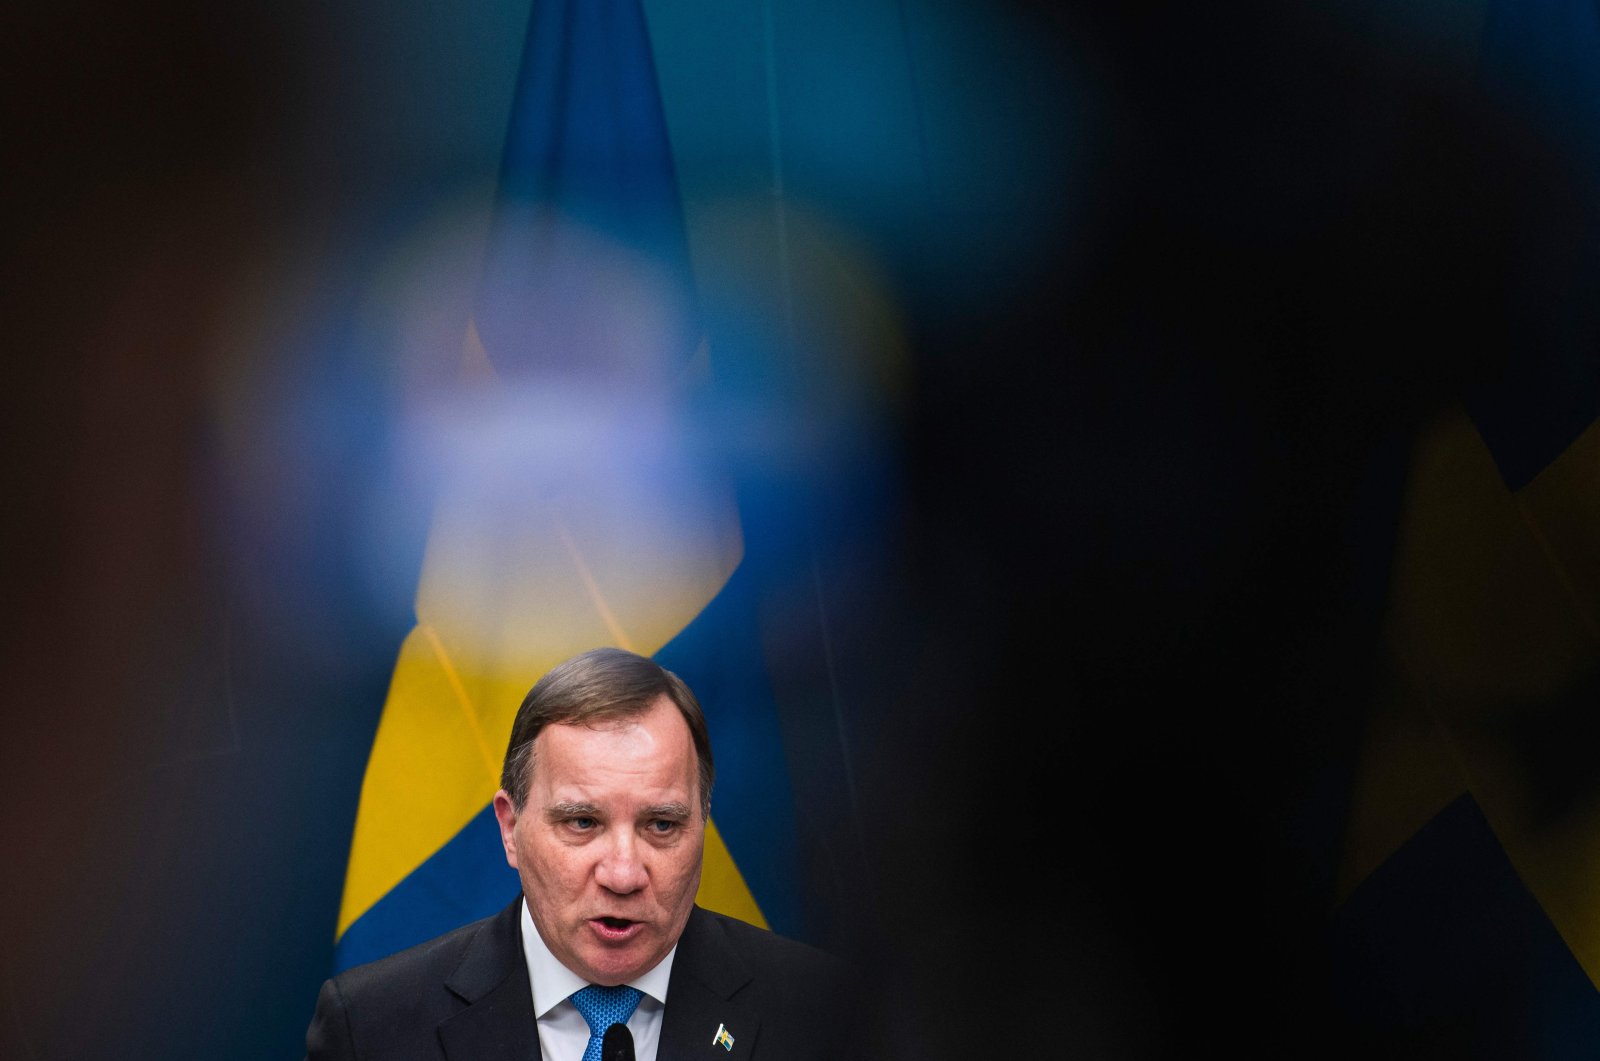 Swedish Prime Minister Stefan Lofven speaks at a press conference about the situation of the coronavirus at the government headquarters in Stockholm, Sweden, March 31, 2020. (AFP Photo)